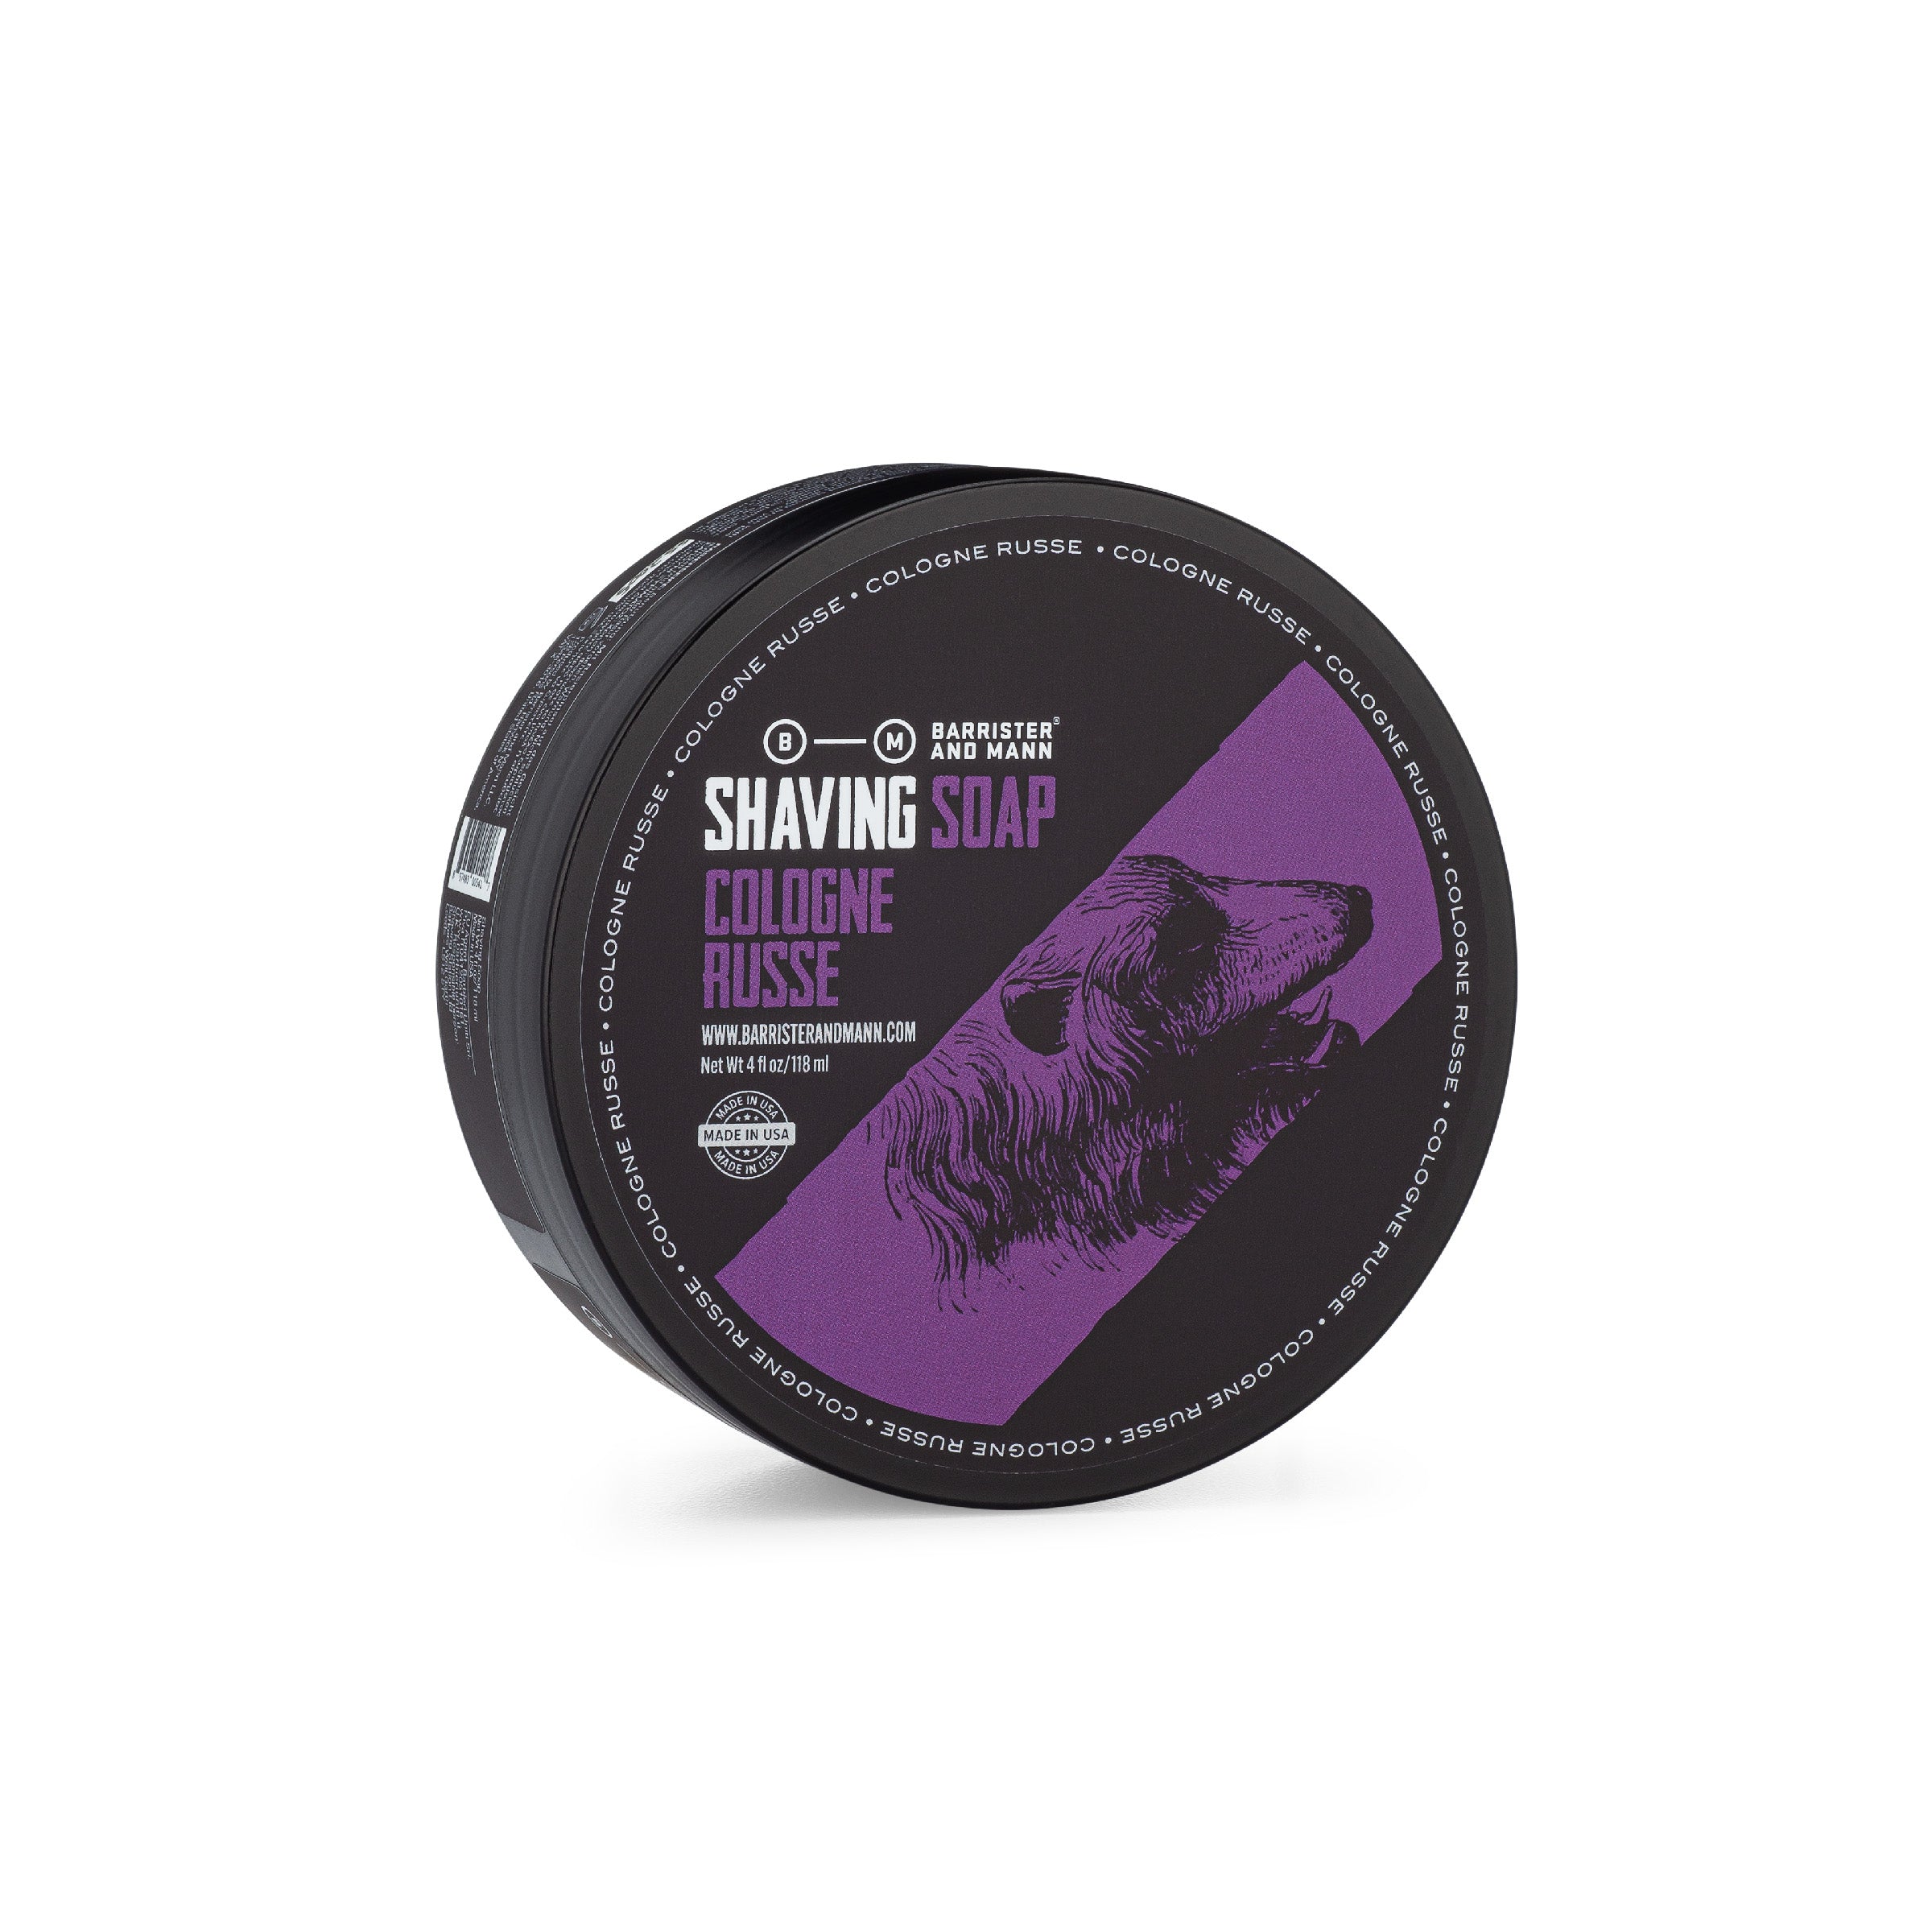 Cologne Russe Shaving Soap - Barrister and Mann LLC